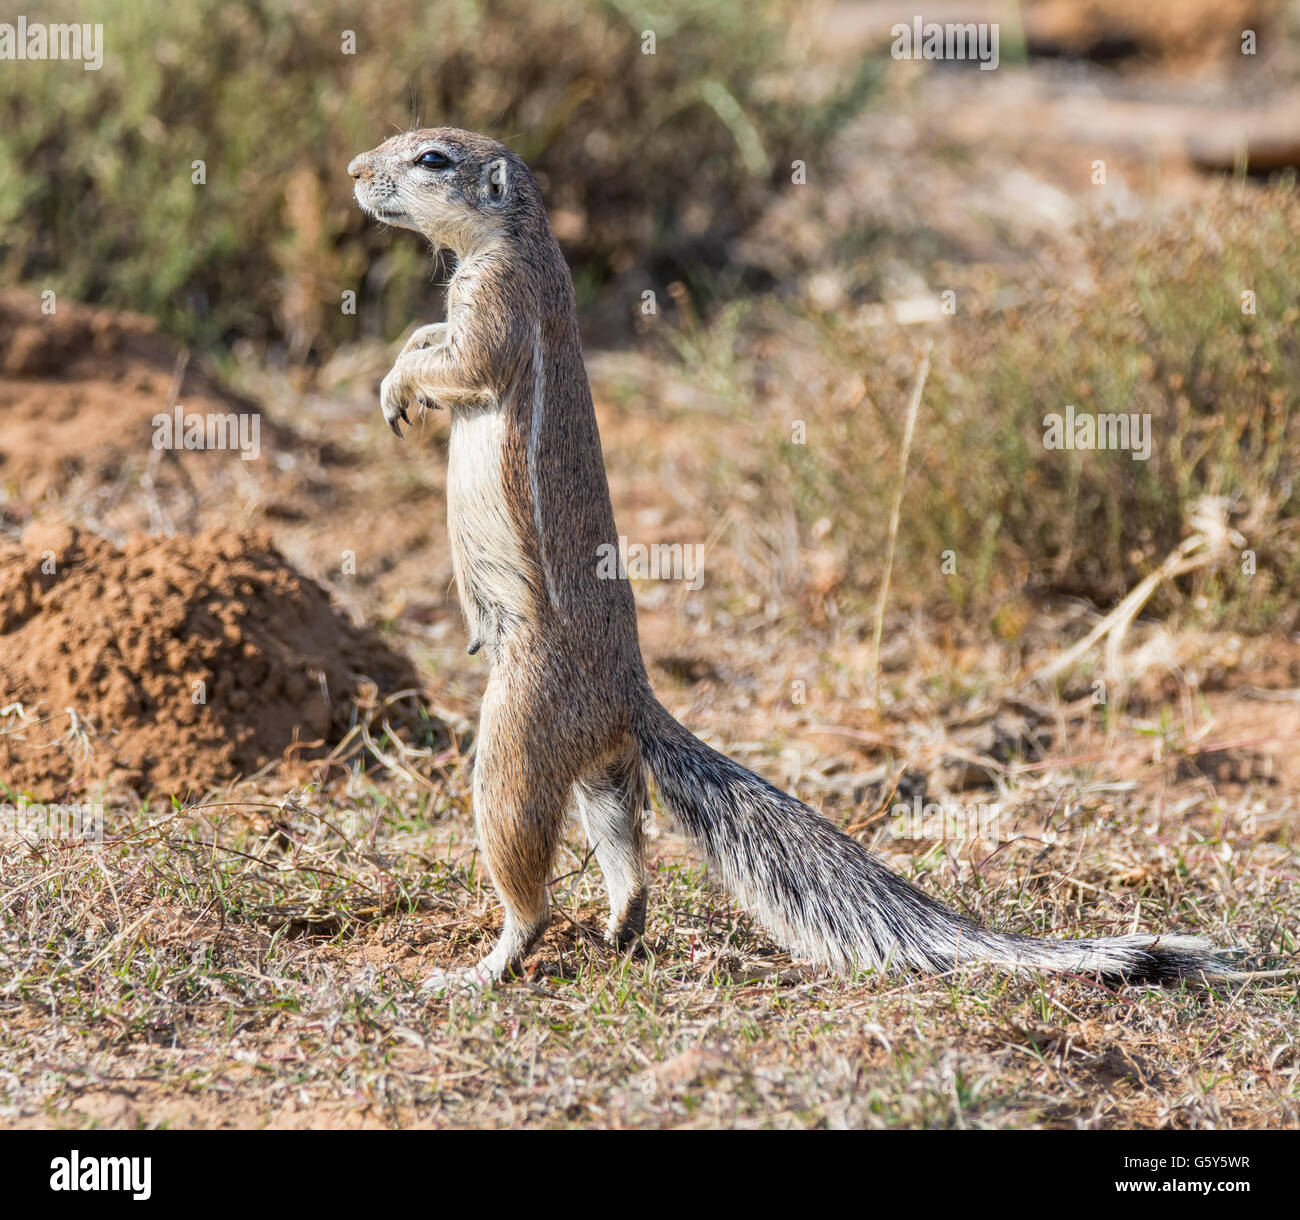 An African Ground Squirrel forages in grassland in Southern Africa Stock Photo